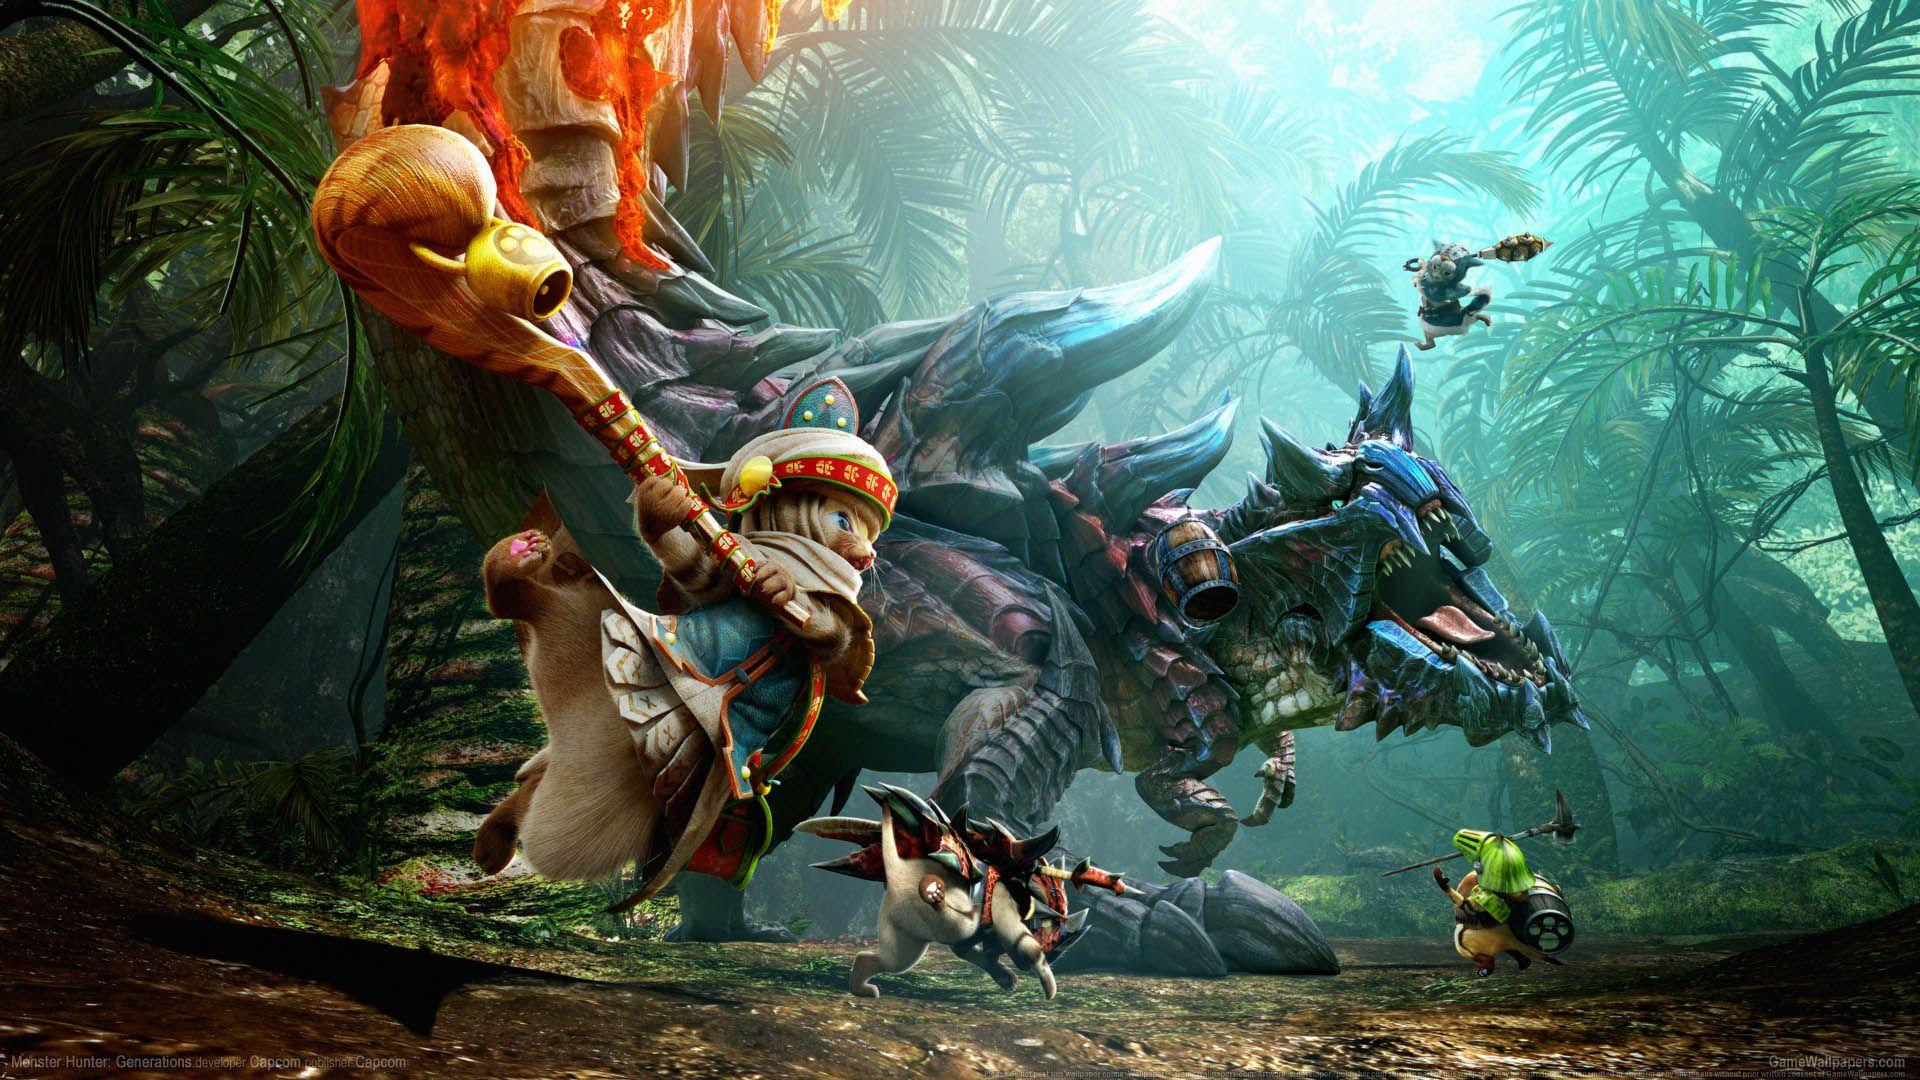 Monster Hunter Generations Wallpapers Top Free Monster Hunter Generations Backgrounds Wallpaperaccess